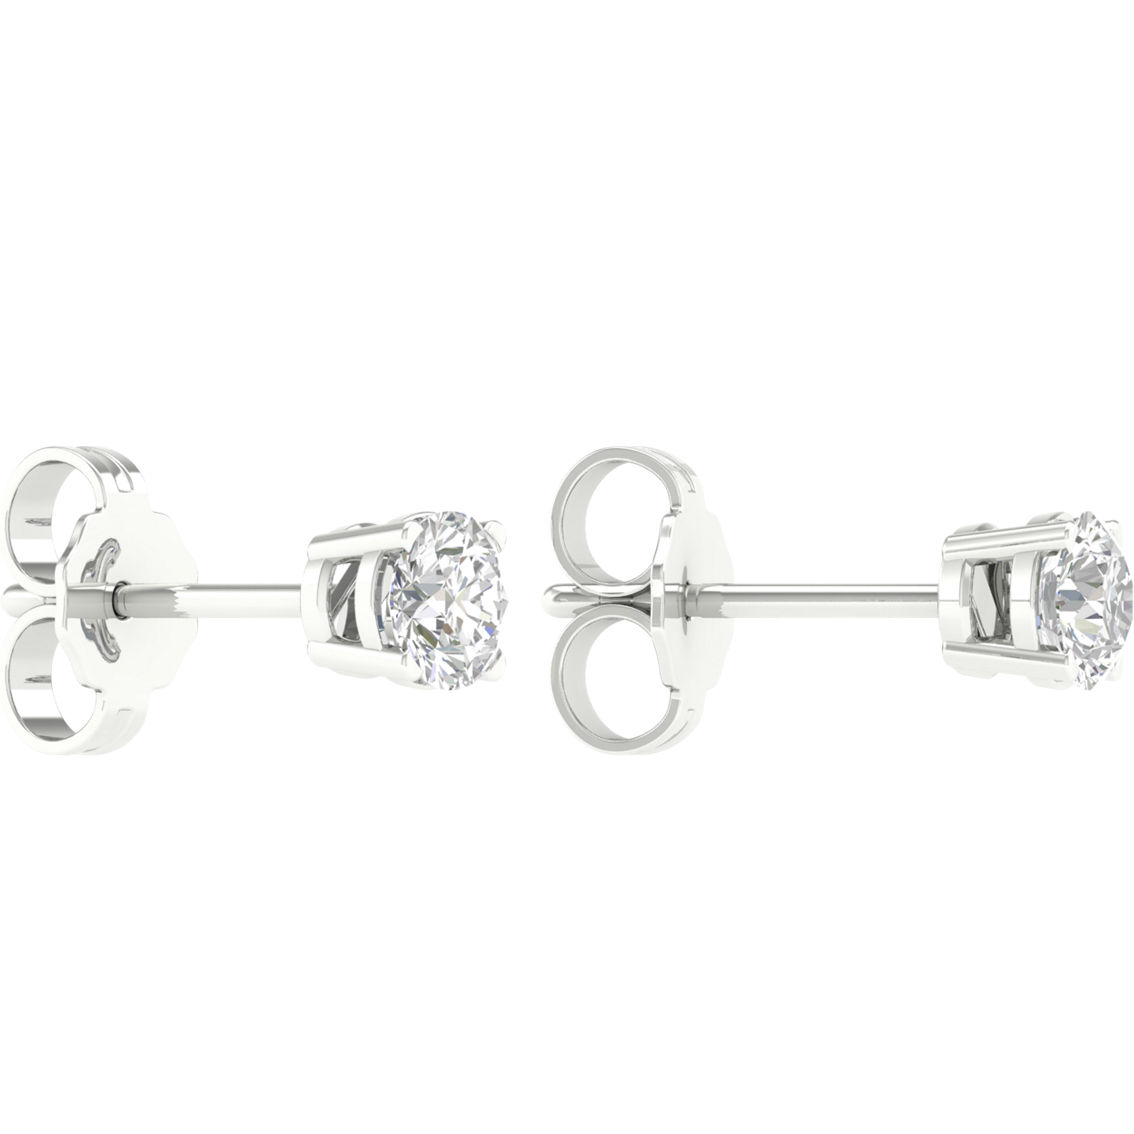 Pure Brilliance 14K White Gold 1/2 CTW Stud Earrings with IGI Certification - Image 2 of 2